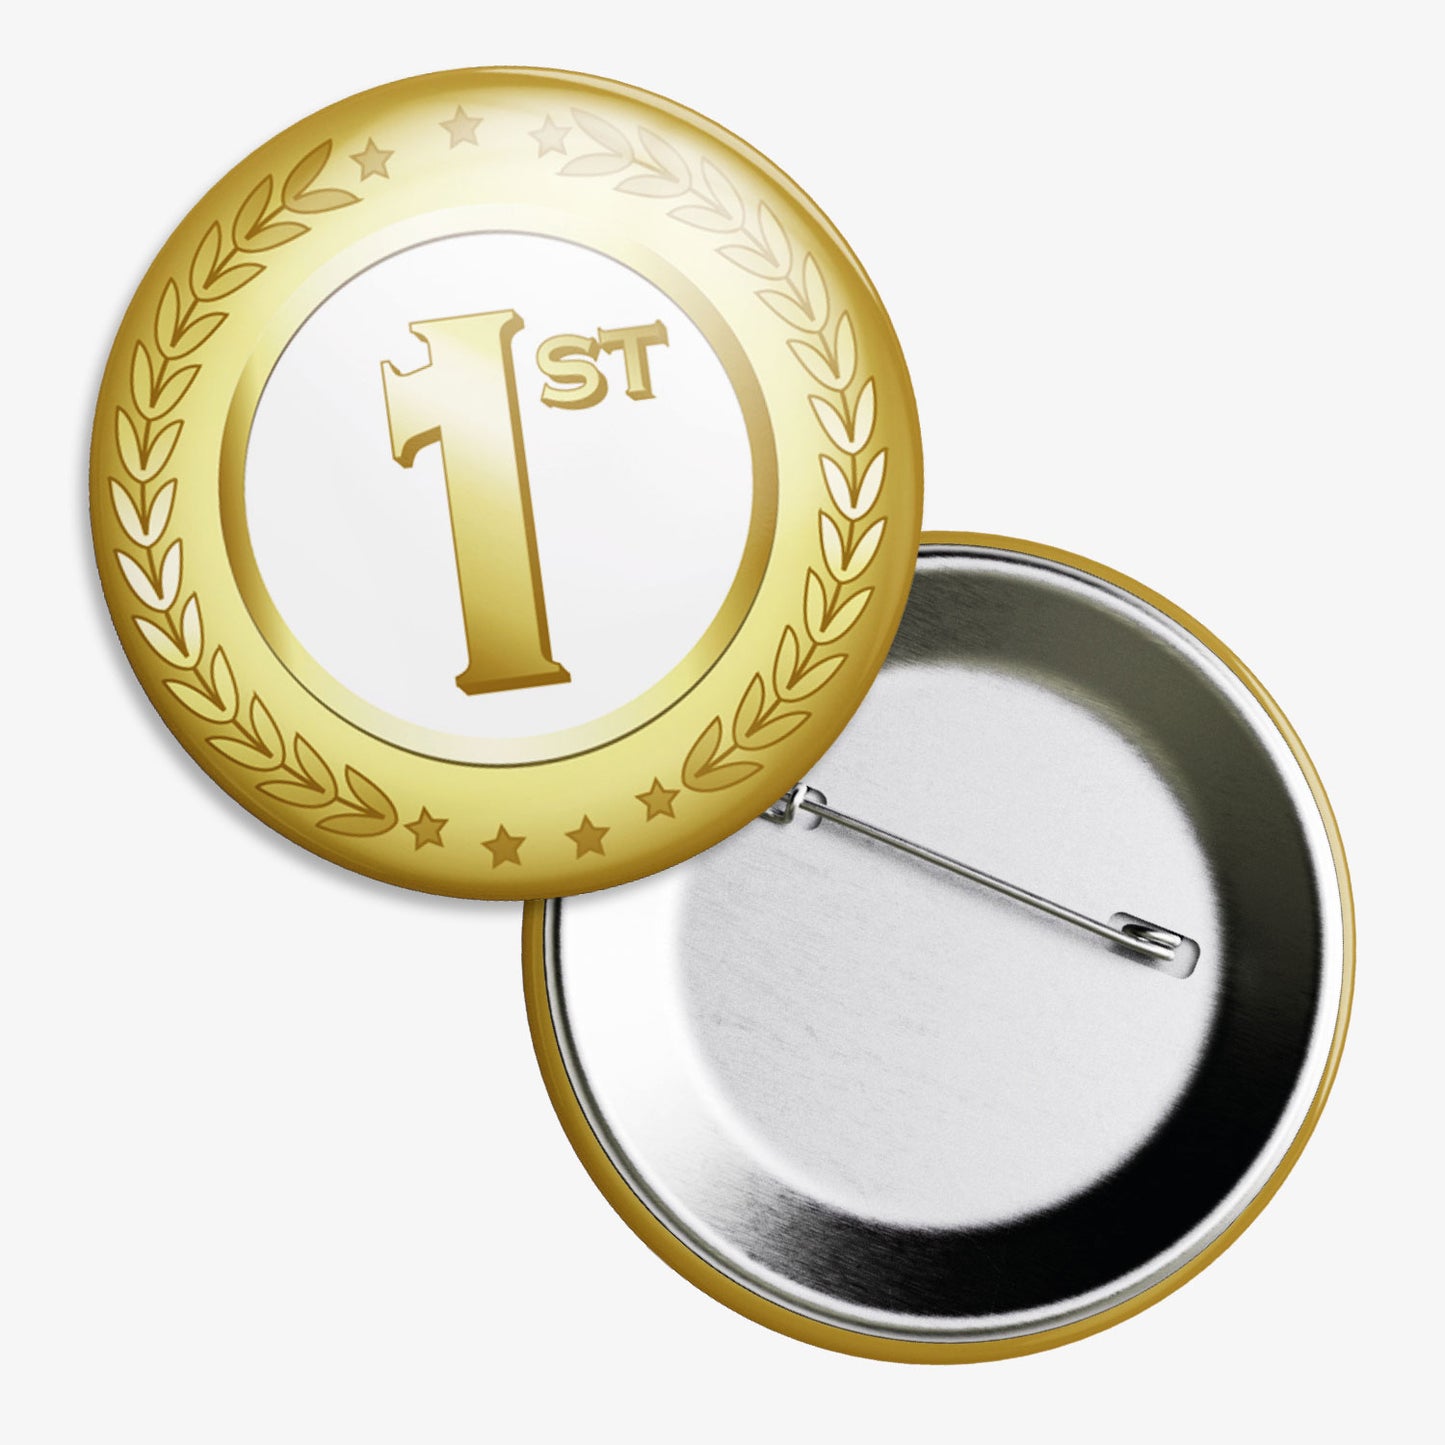 10 First Badges - Gold